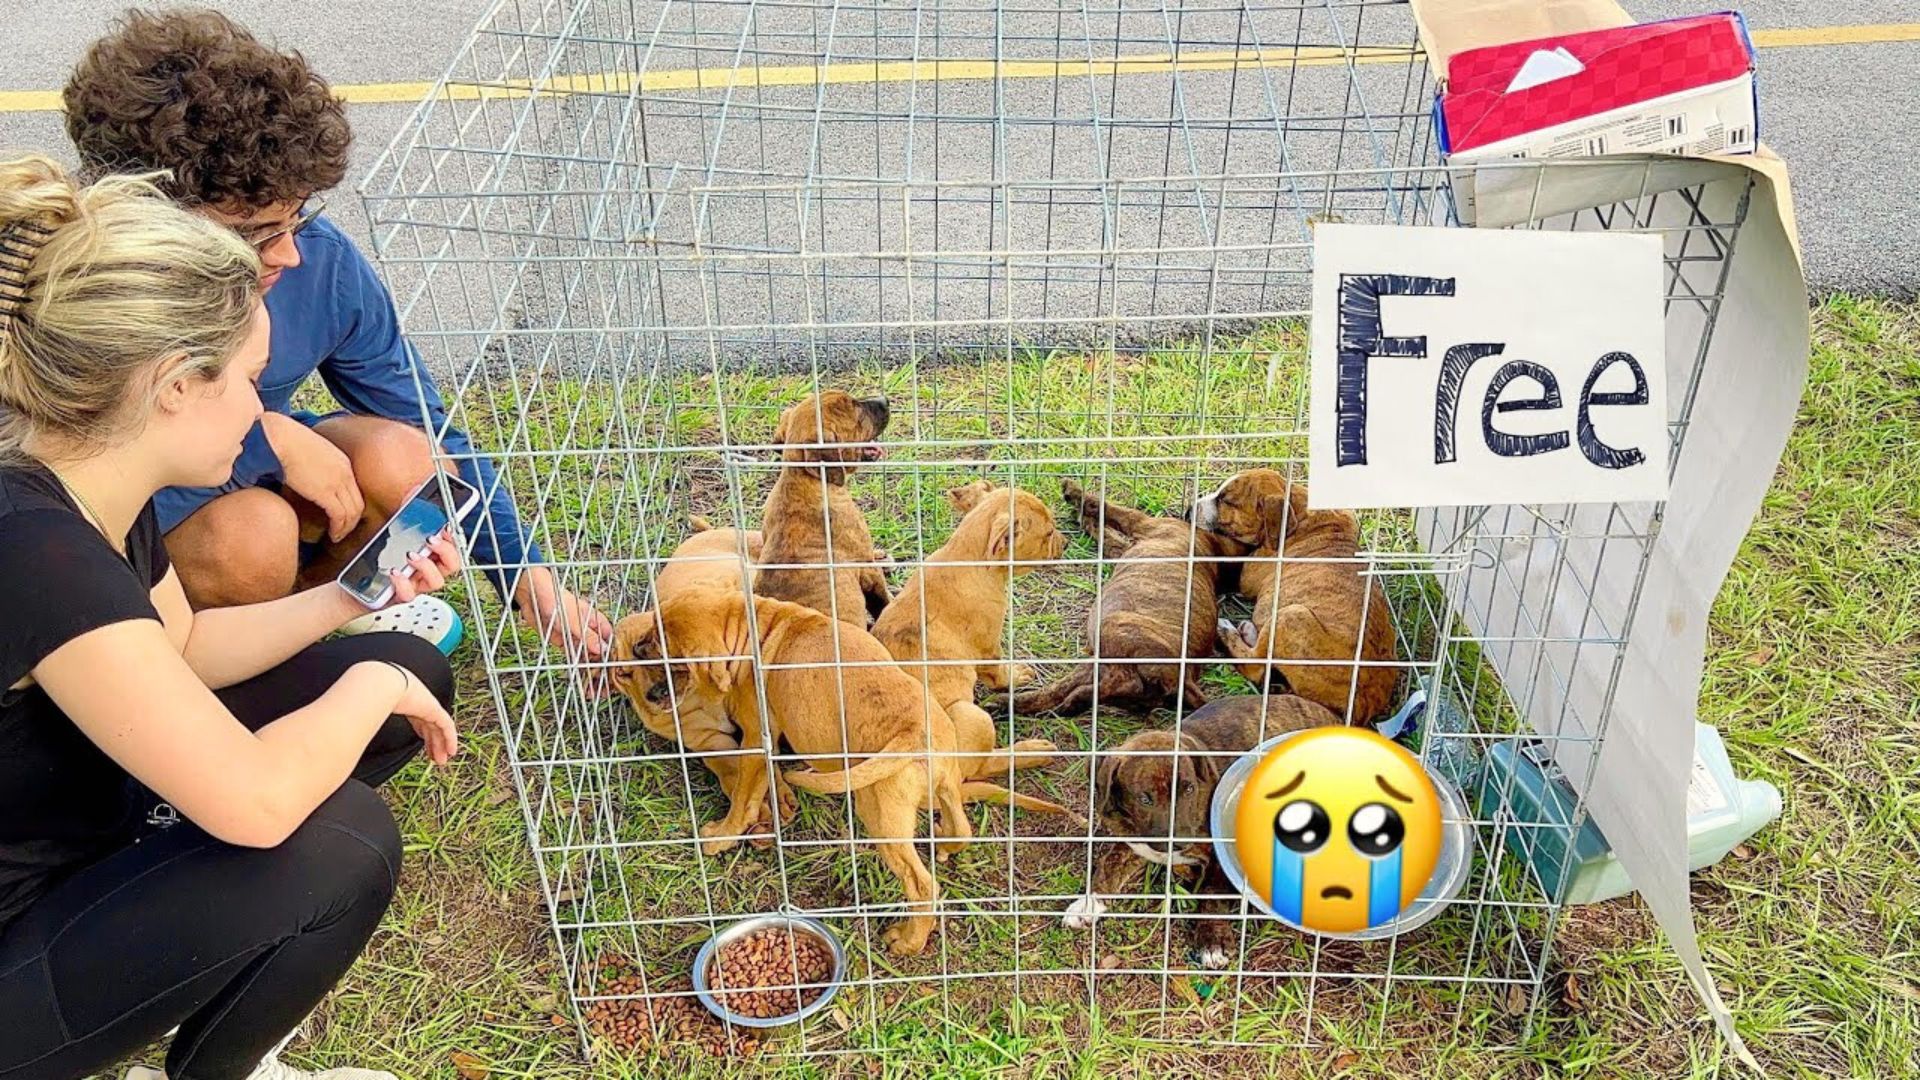 Man Shocked To Find A Kennel With A ‘Free’ Sign Abandoned In A Parking Lot